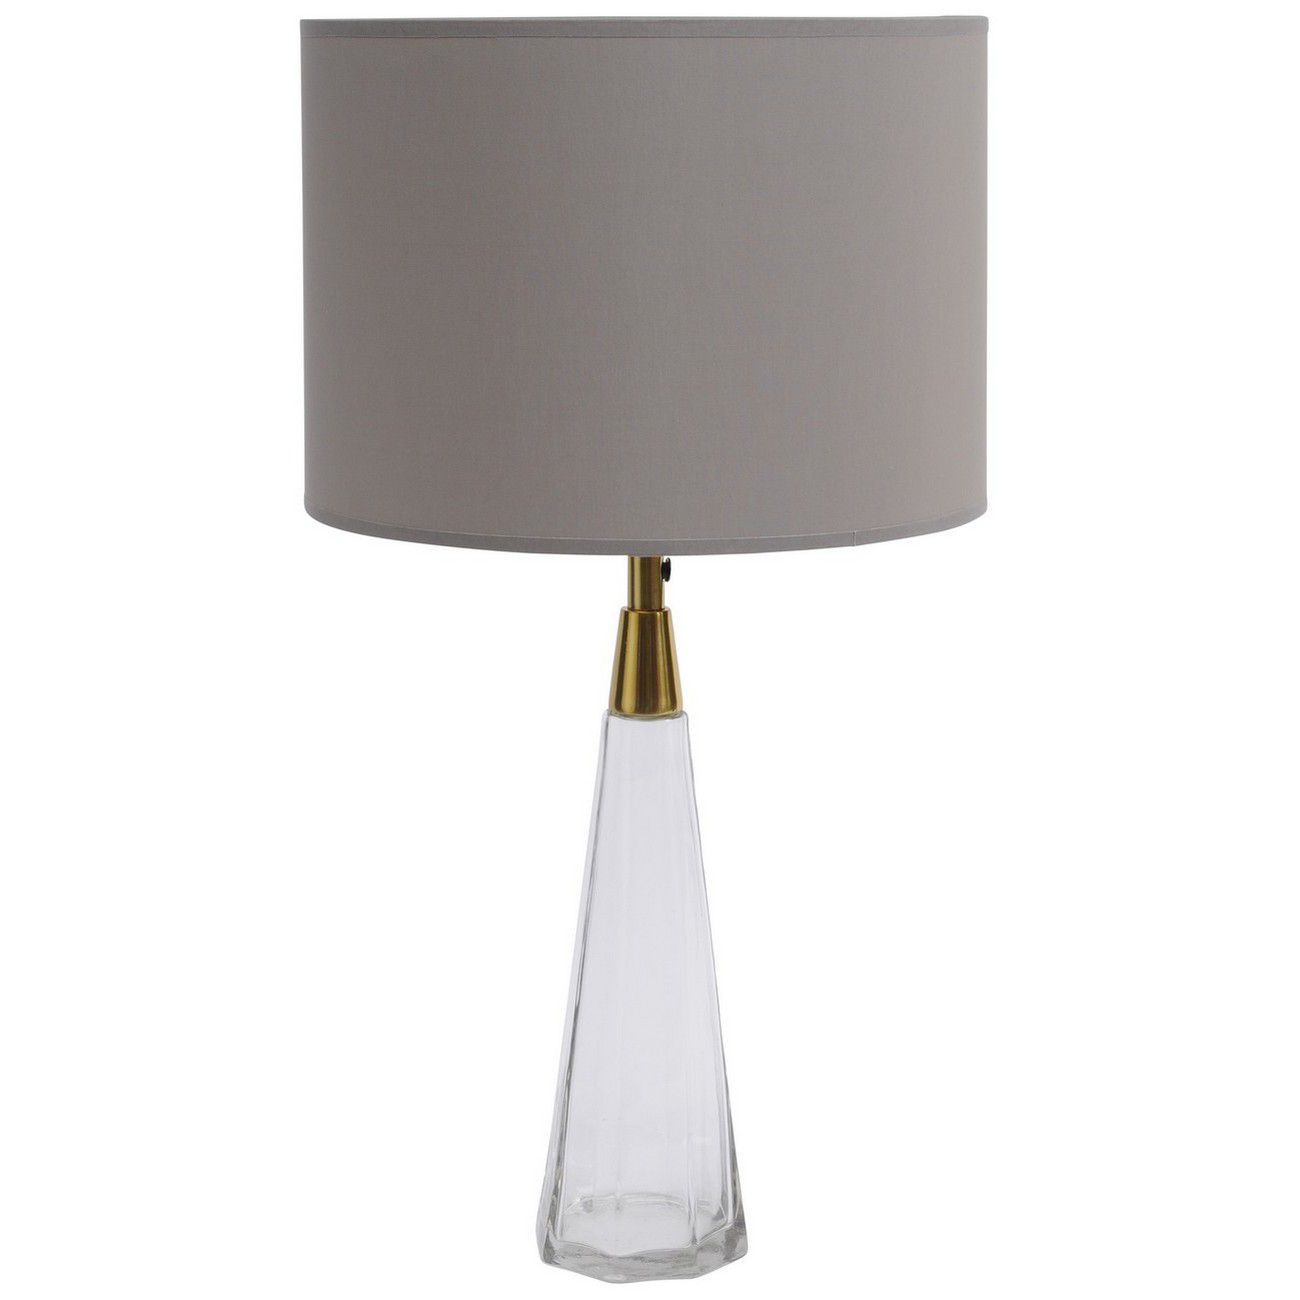 The Libra Company Clear Glass Faceted Small Bedside Lamp